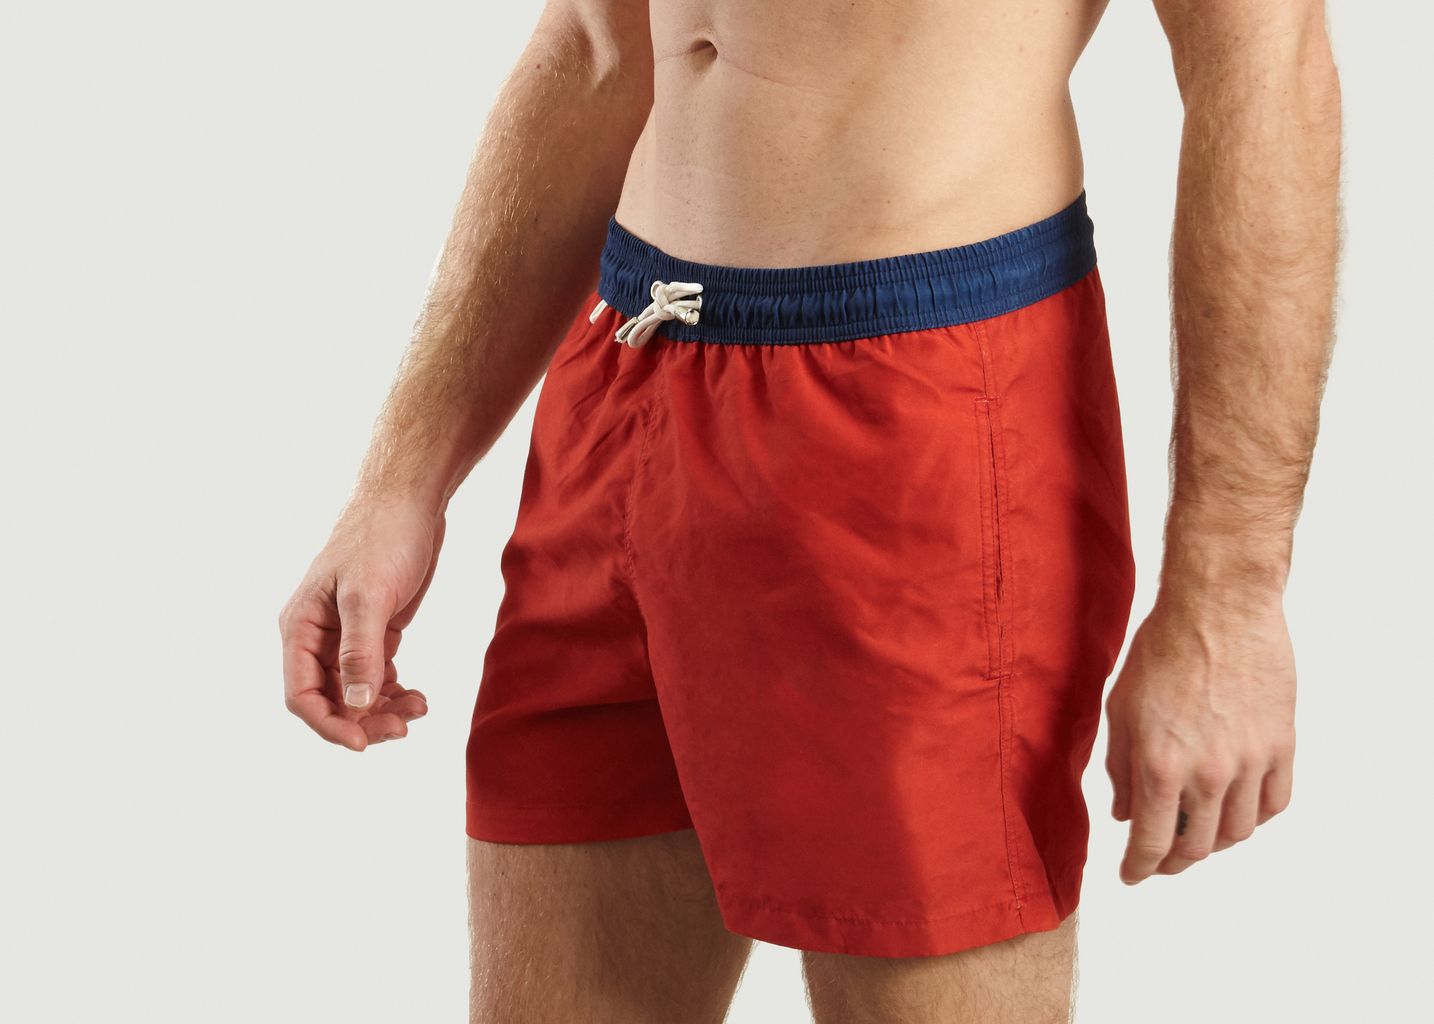 Lobster swimming trunks - Surprise